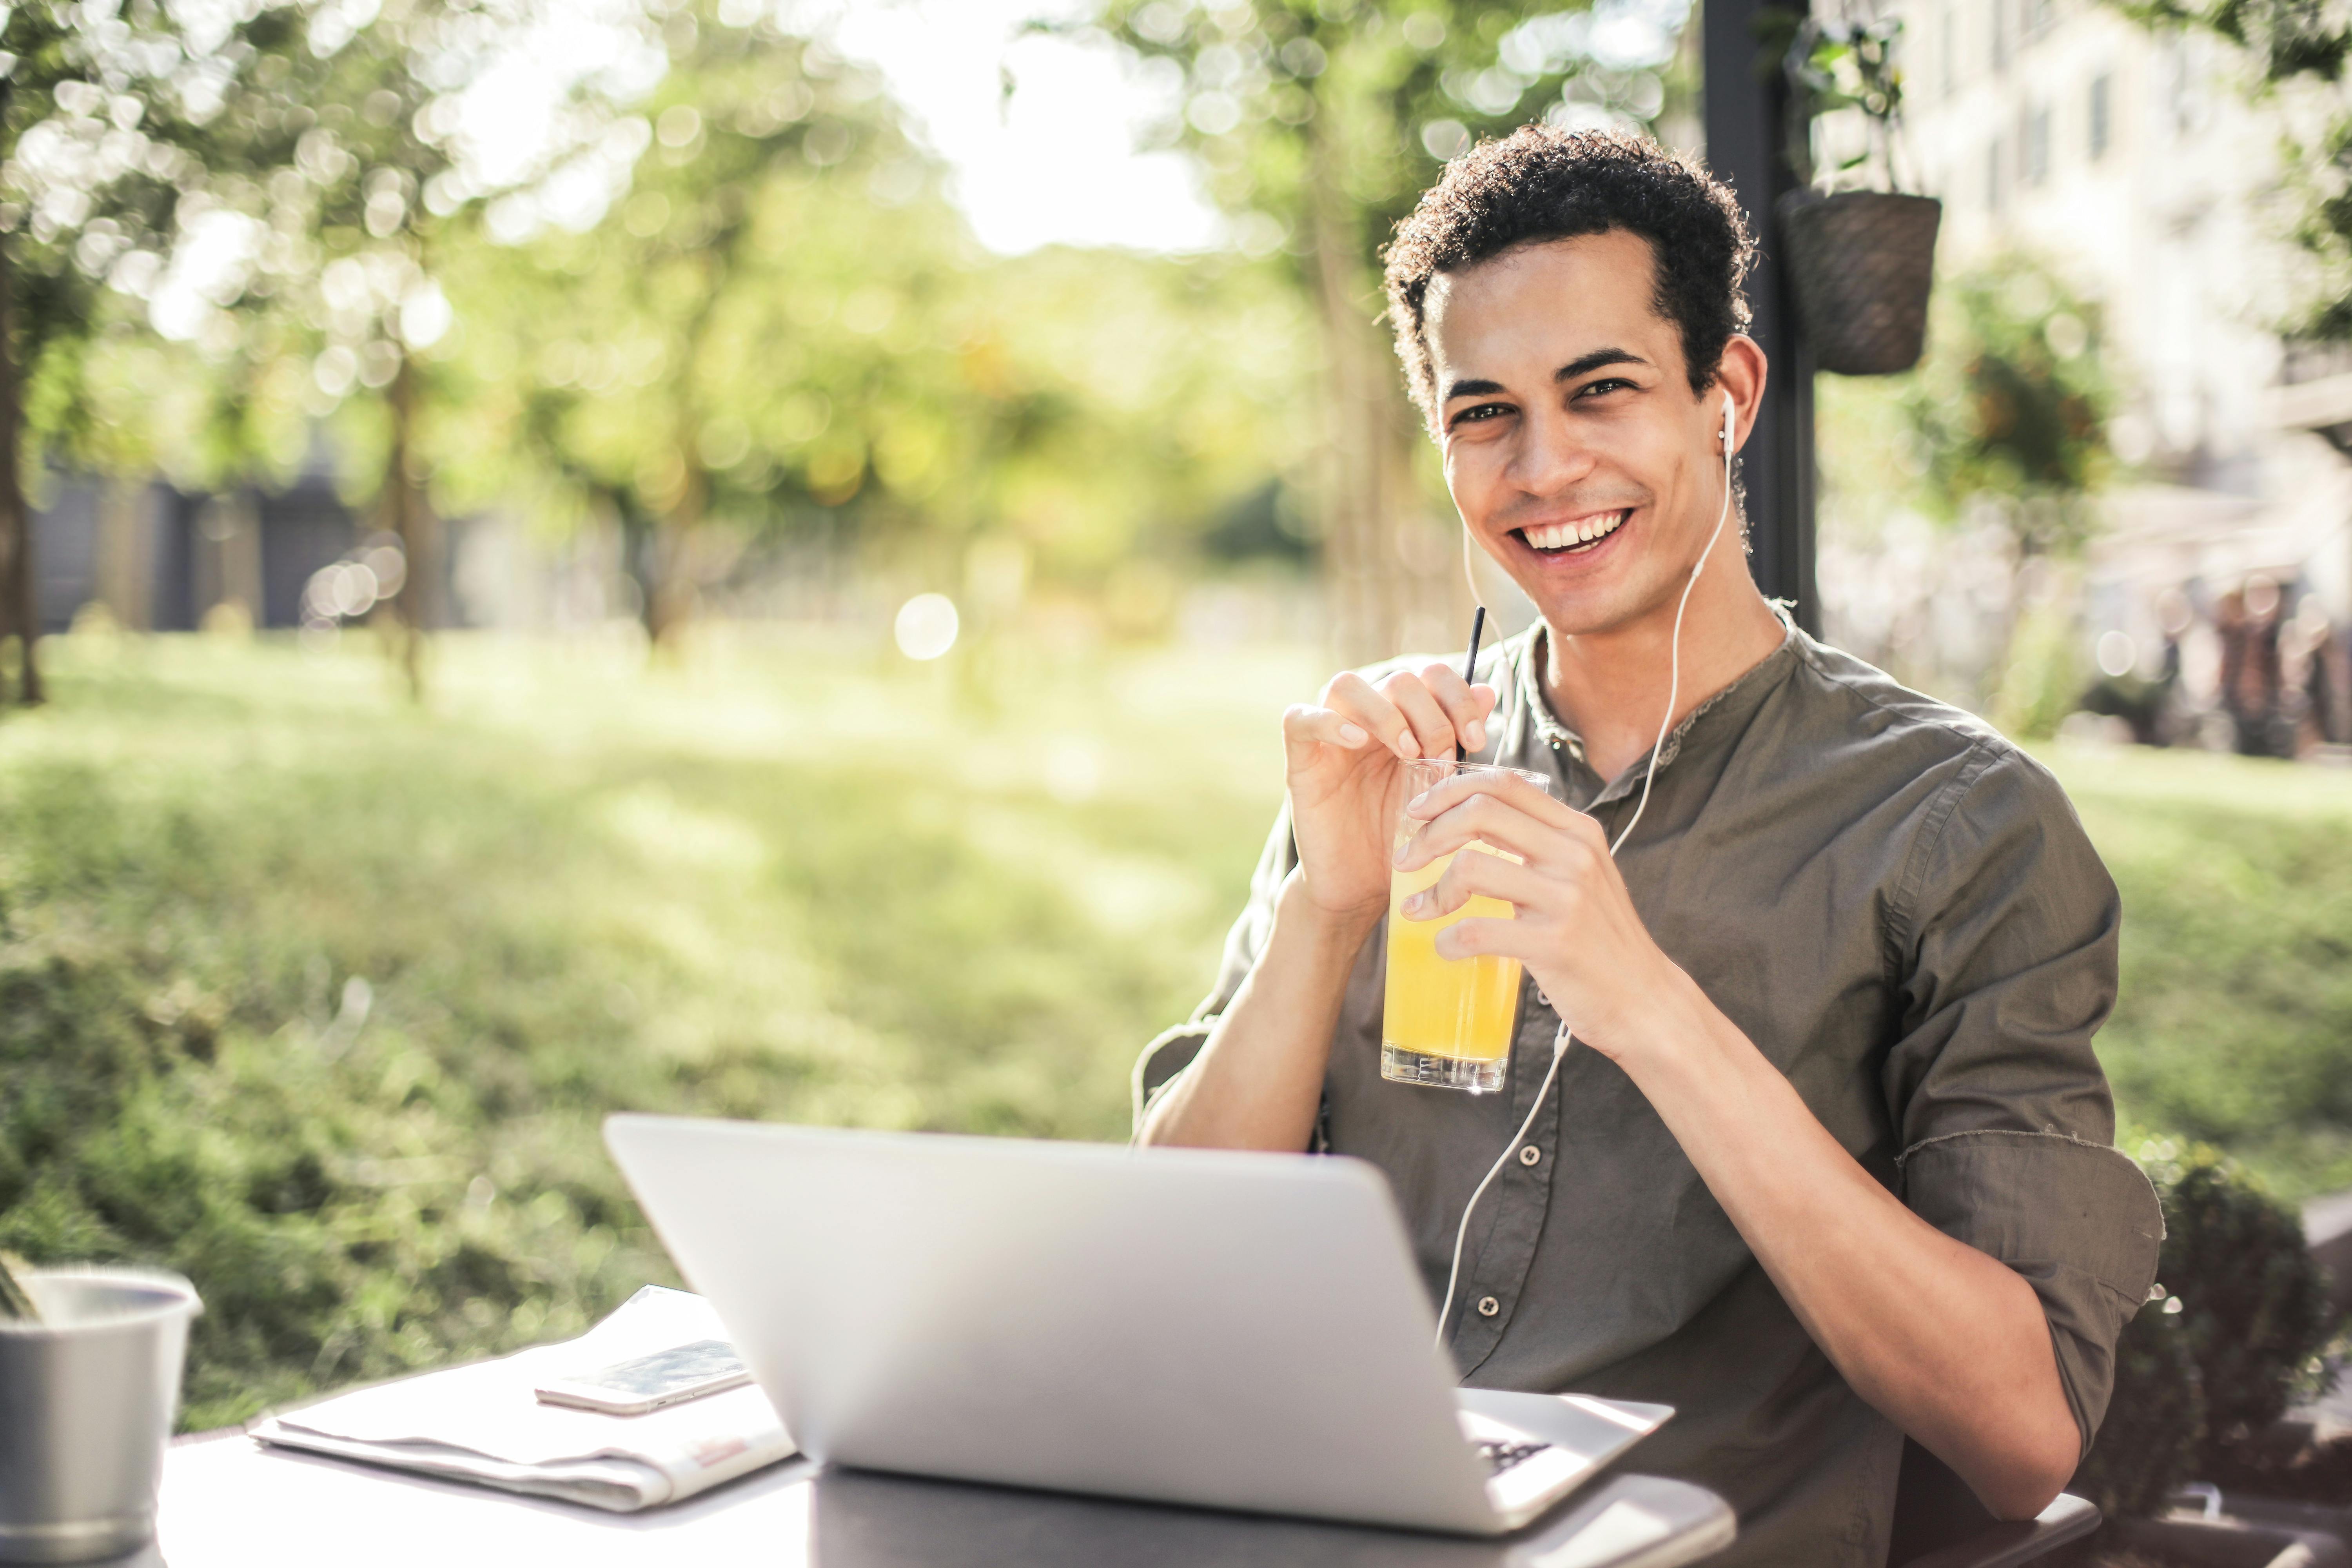 Student listening to music at his laptop outside. Photo by Andrea Piacquadio via Pexels.